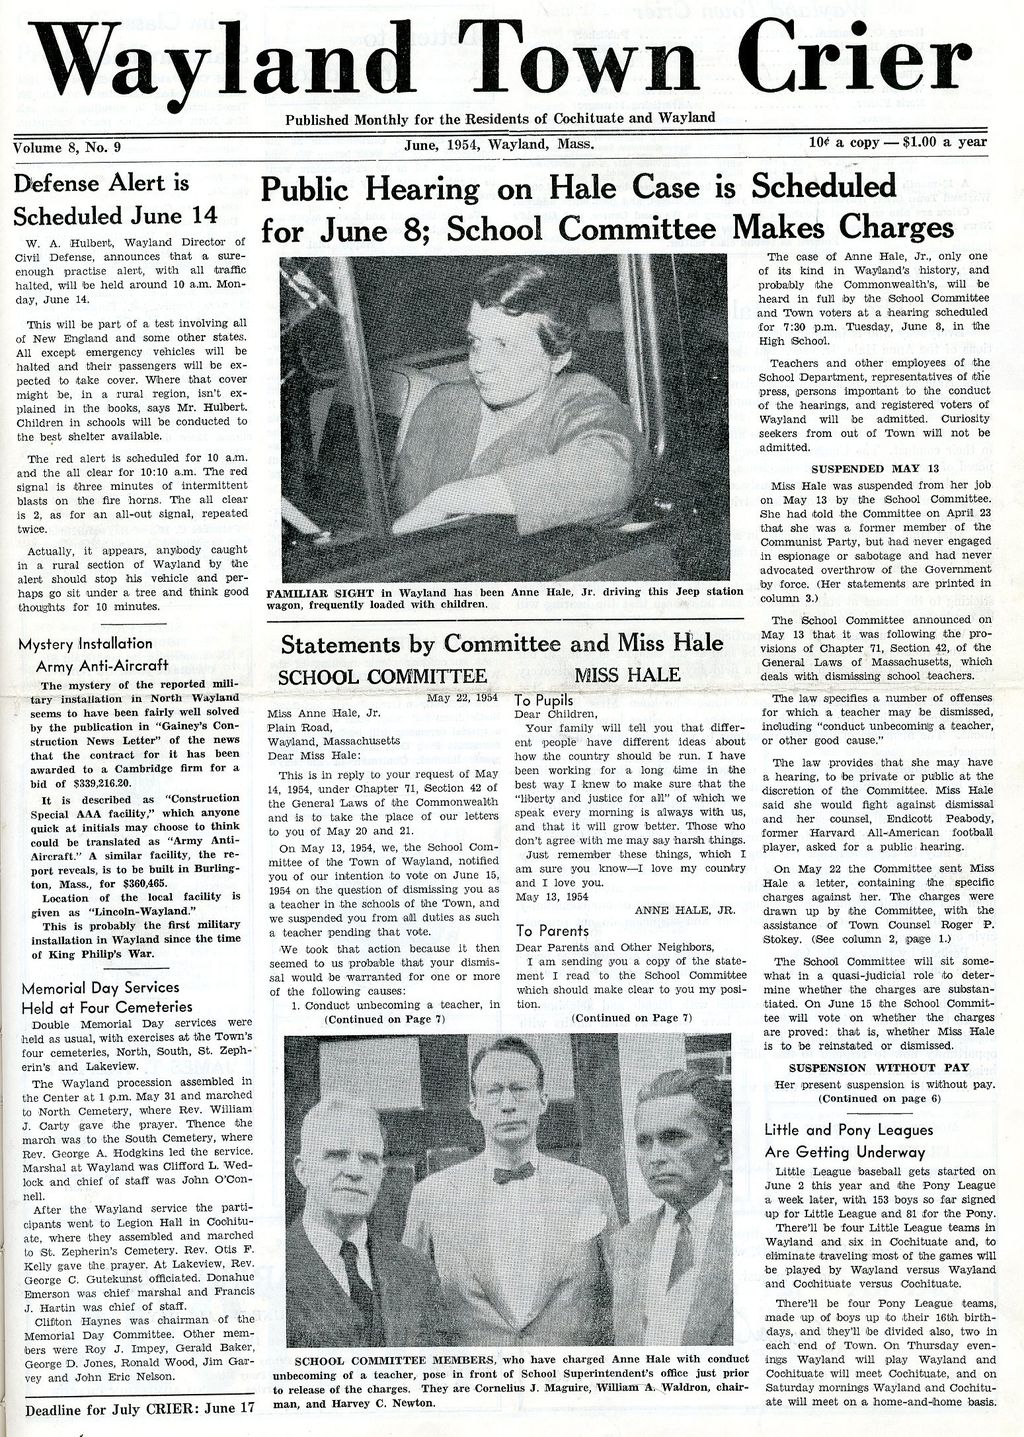 pictured: Newspaper clipping of the Wayland Town Crier for June 1954. Headline reads: “Public Hearing on Hale is Scheduled for June 8; School Committee Makes Charges.” Photo courtesy of the Boston Globe